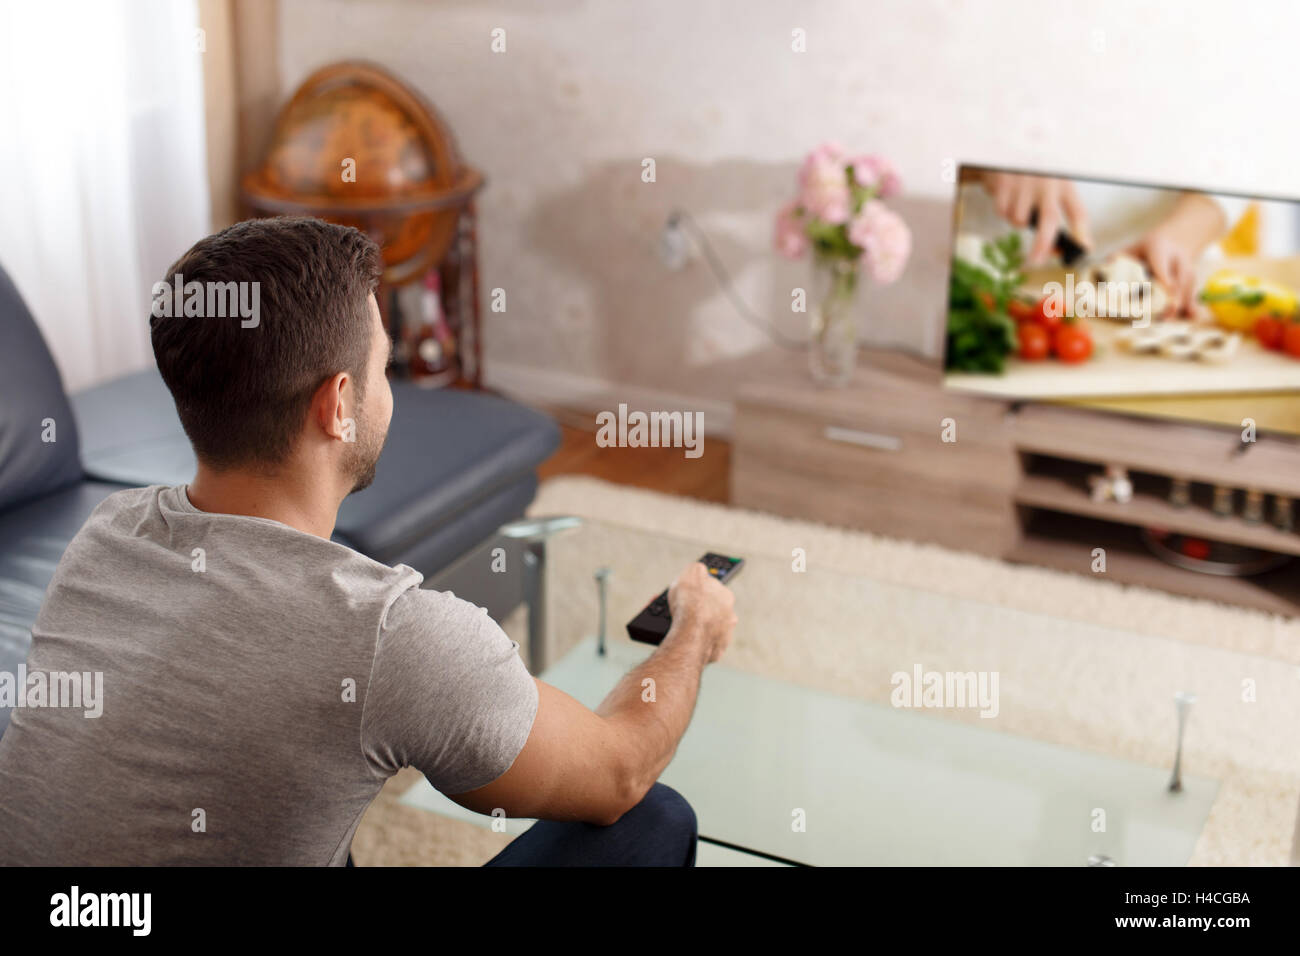 Excited man watching cooking tutorial in TV, pushing button on remote control Stock Photo